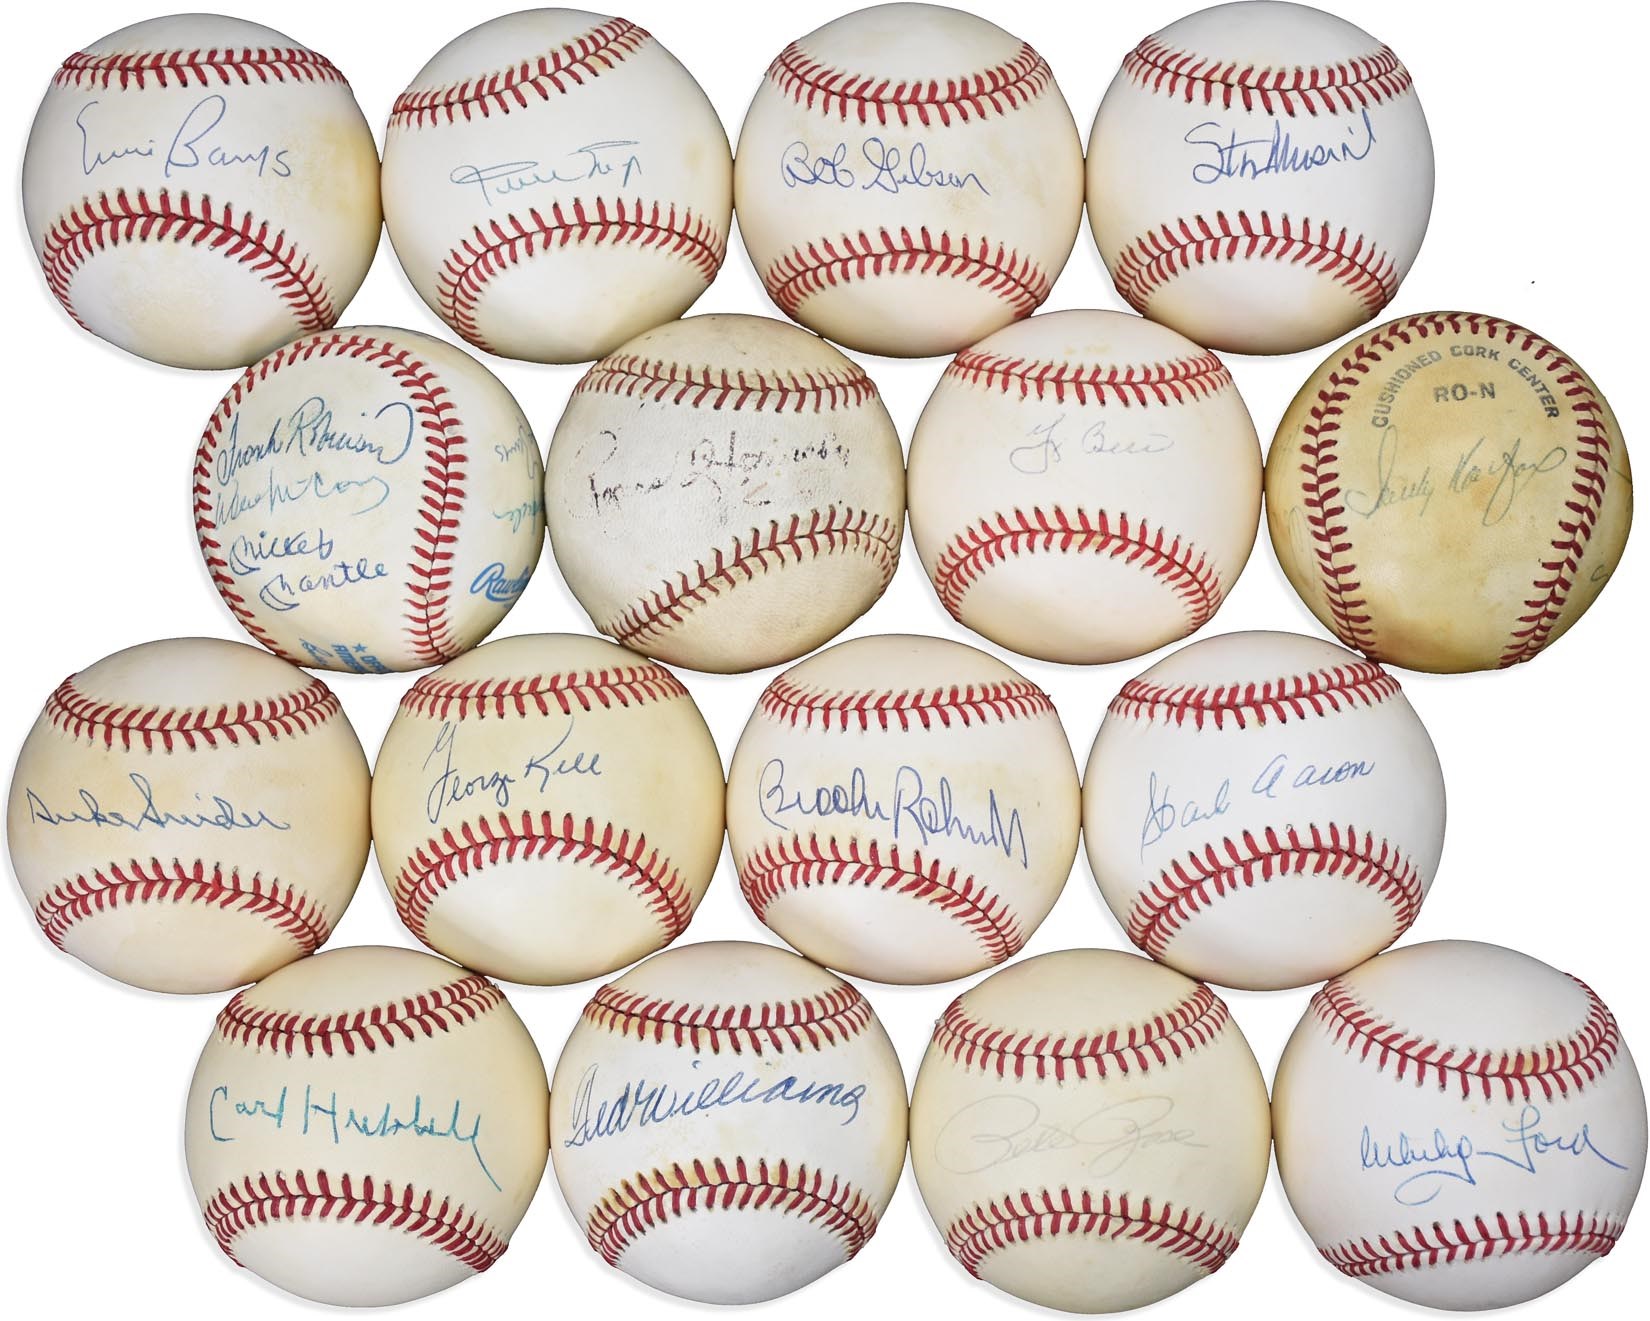 Baseball Autographs - Nice Signed Baseball Collection w/Rogers Hornsby Single-Signed, 500 HR Club & Clemente (40+)